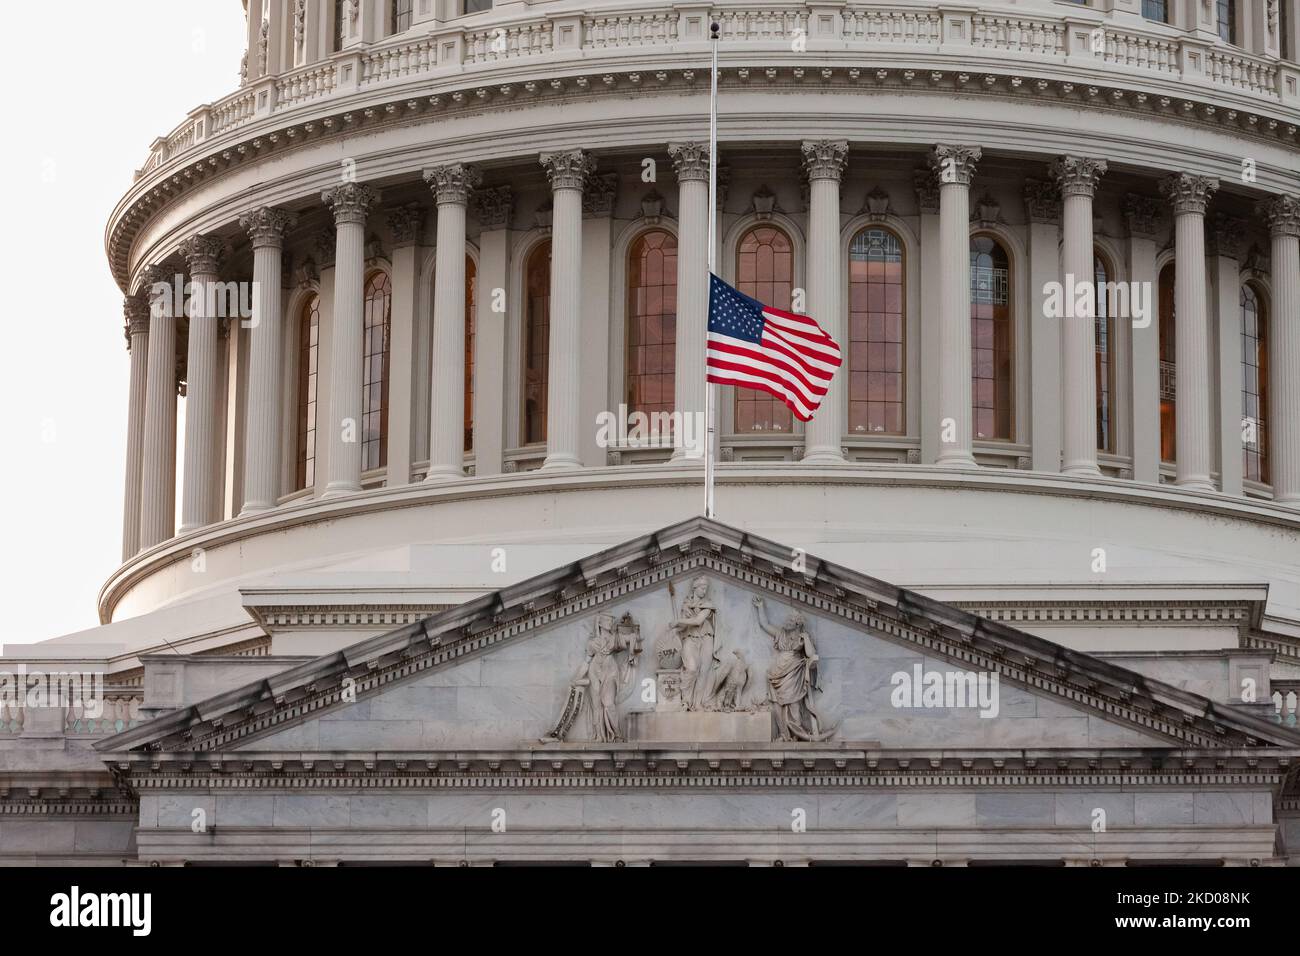 The flag on the east front of the US Capitol flies at half-staff in honor of former Senator Harry Reid, as he lies in state in teh rotunda. Reid was a Nevada Democrat who served in the House of Representatives from 1983-1987. He was a Senator from 1987-2017, and alternately served as Senate Majority and Minority leader from 2005-2017. (Photo by Allison Bailey/NurPhoto) Stock Photo